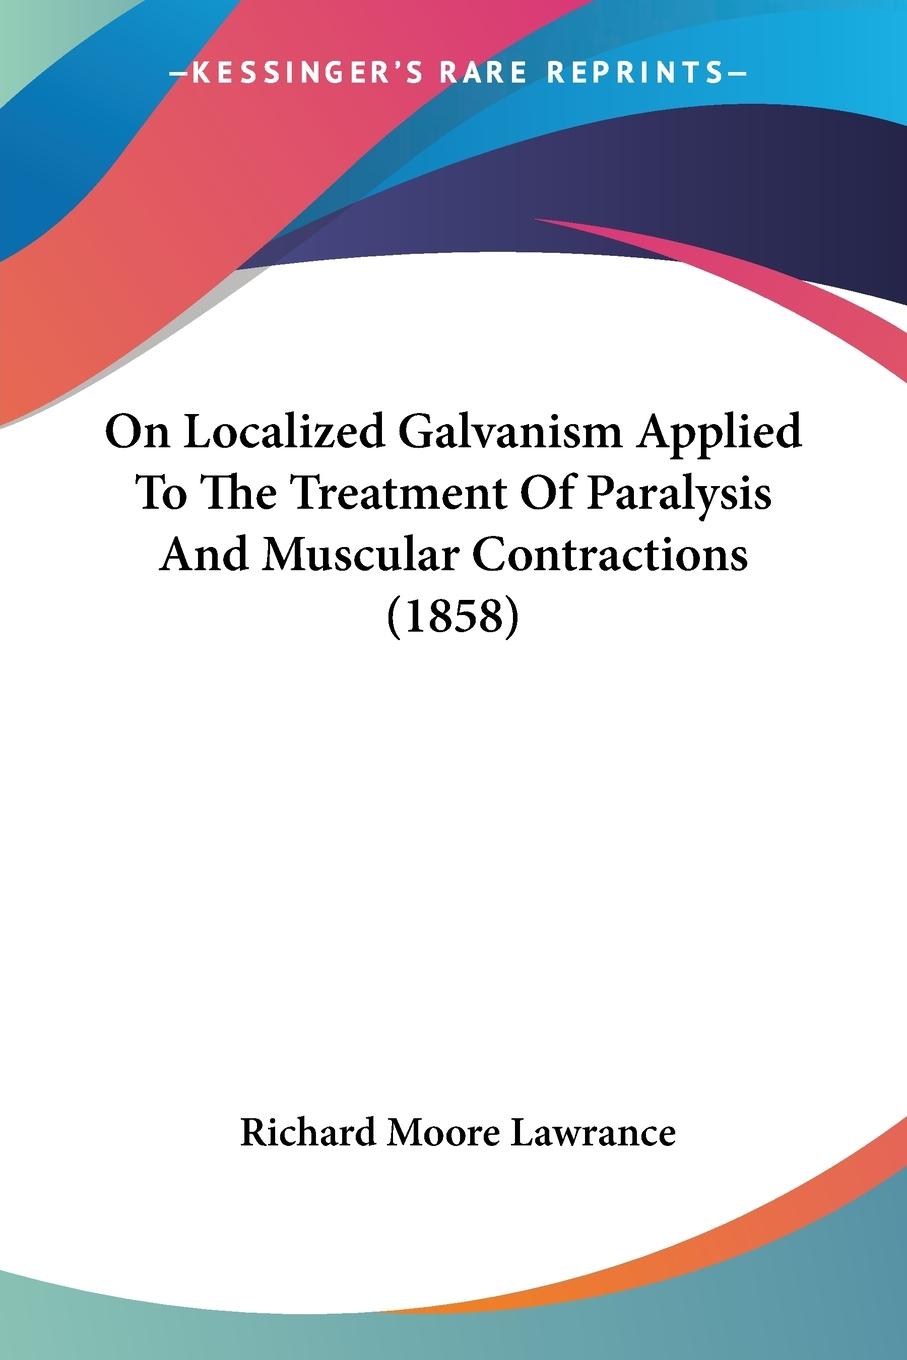 On Localized Galvanism Applied To The Treatment Of Paralysis And Muscular Contractions (1858) - Lawrance, Richard Moore